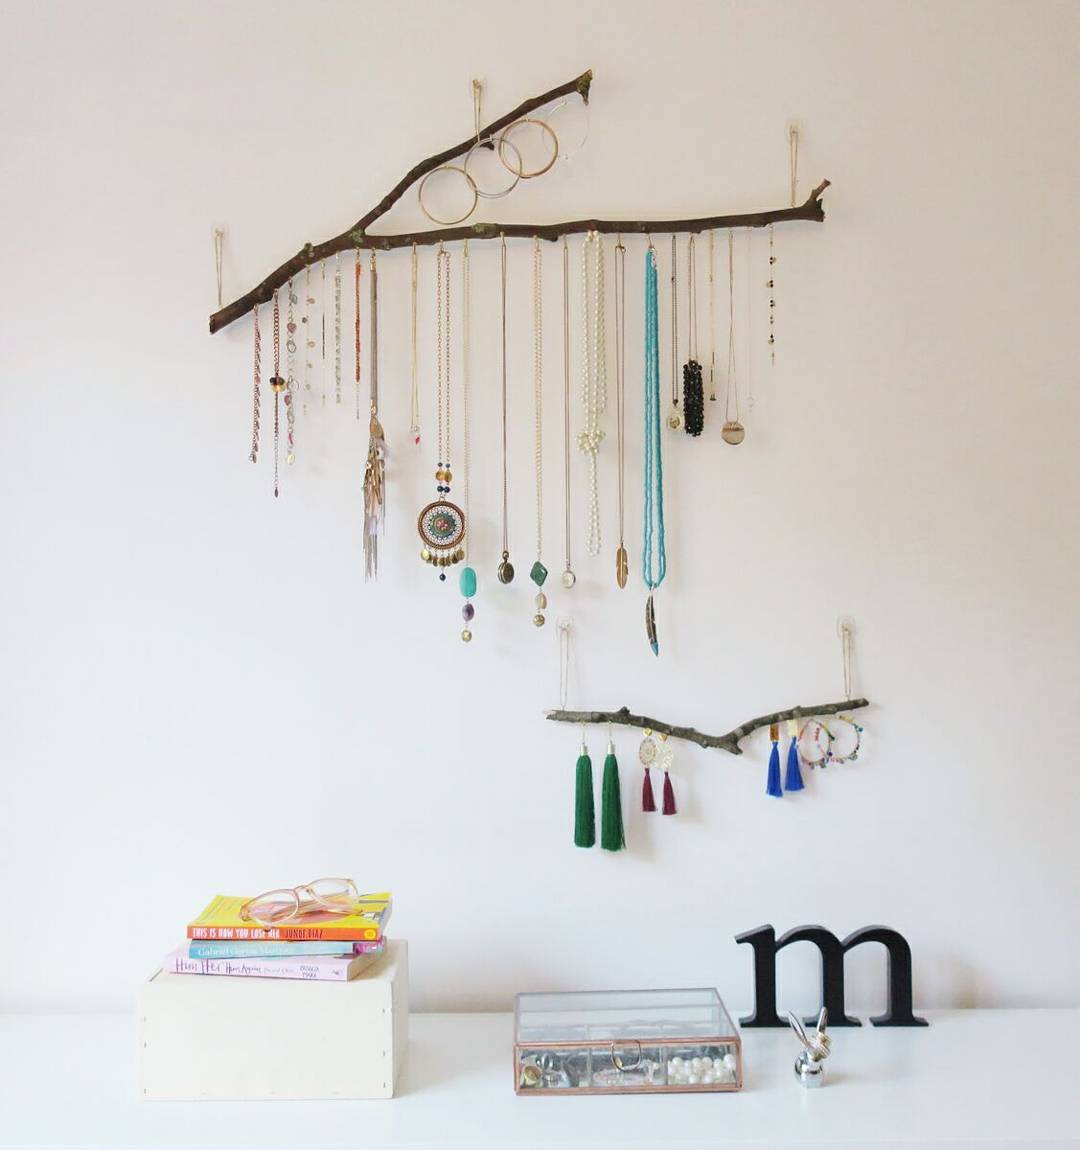 Hanging branch jewelry organizer with necklaces. Photo by Instagram user @blancometro